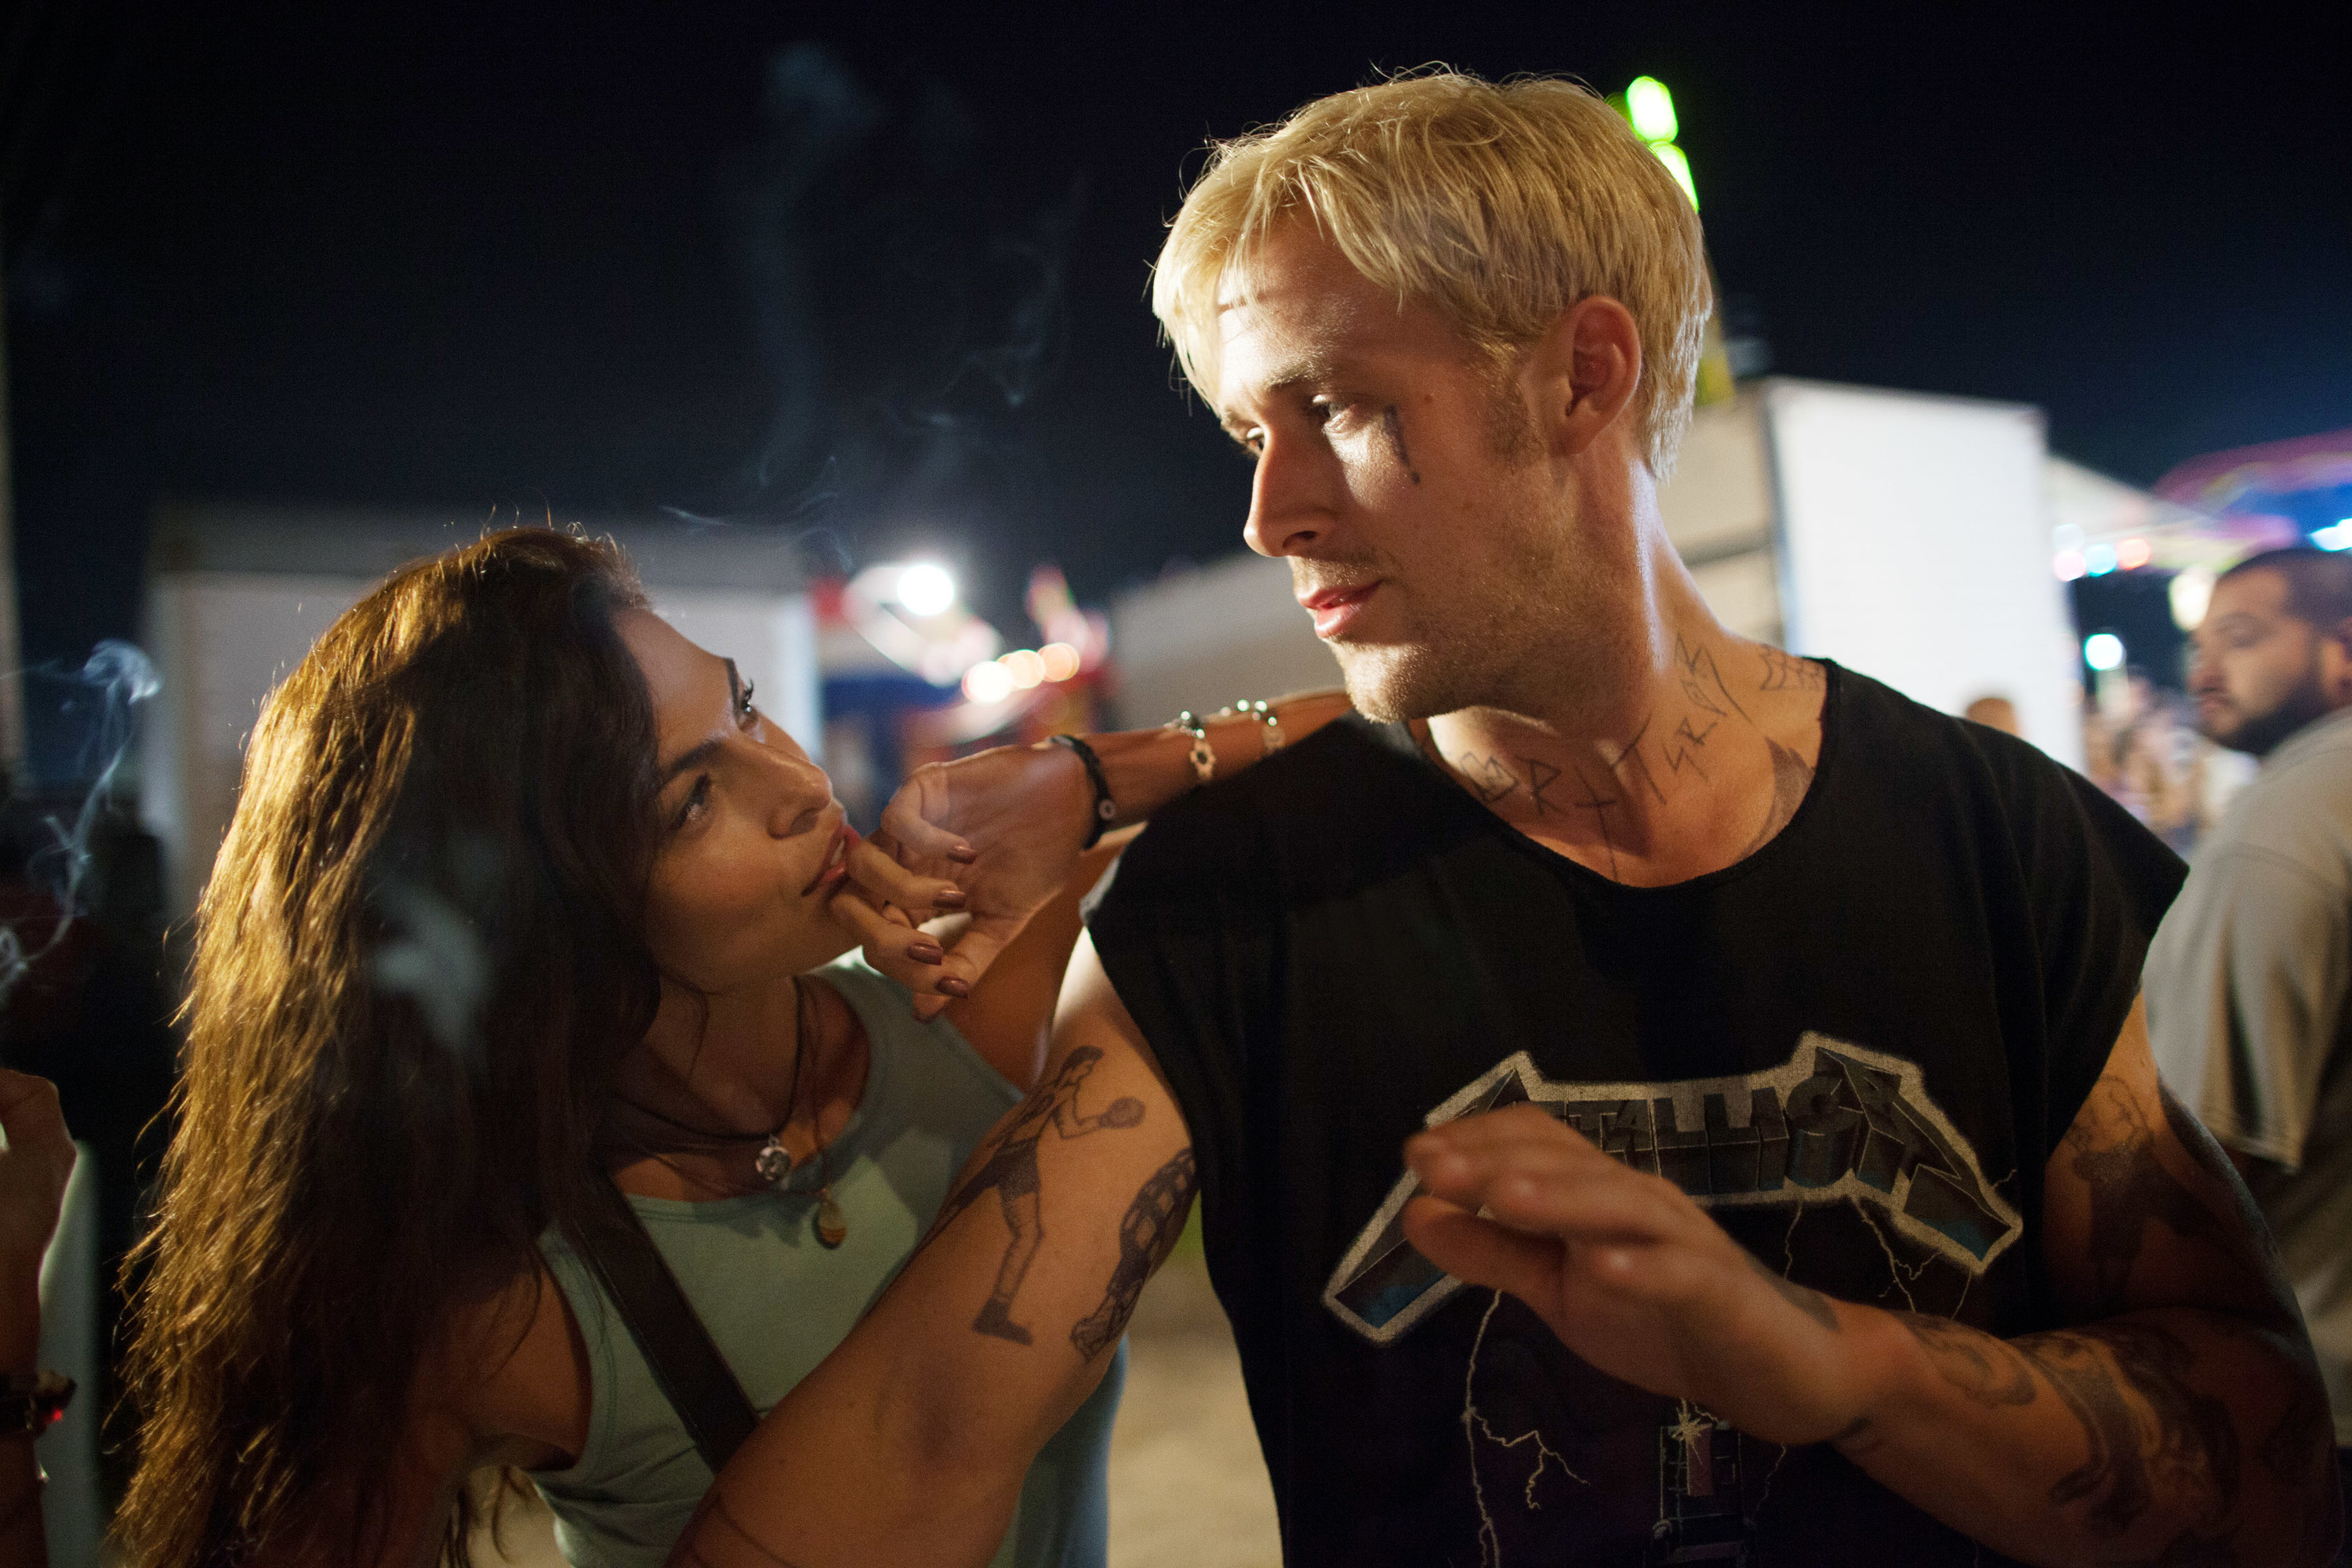 Eva and Ryan look at each other in a moment from their film The Place Beyond the Pines